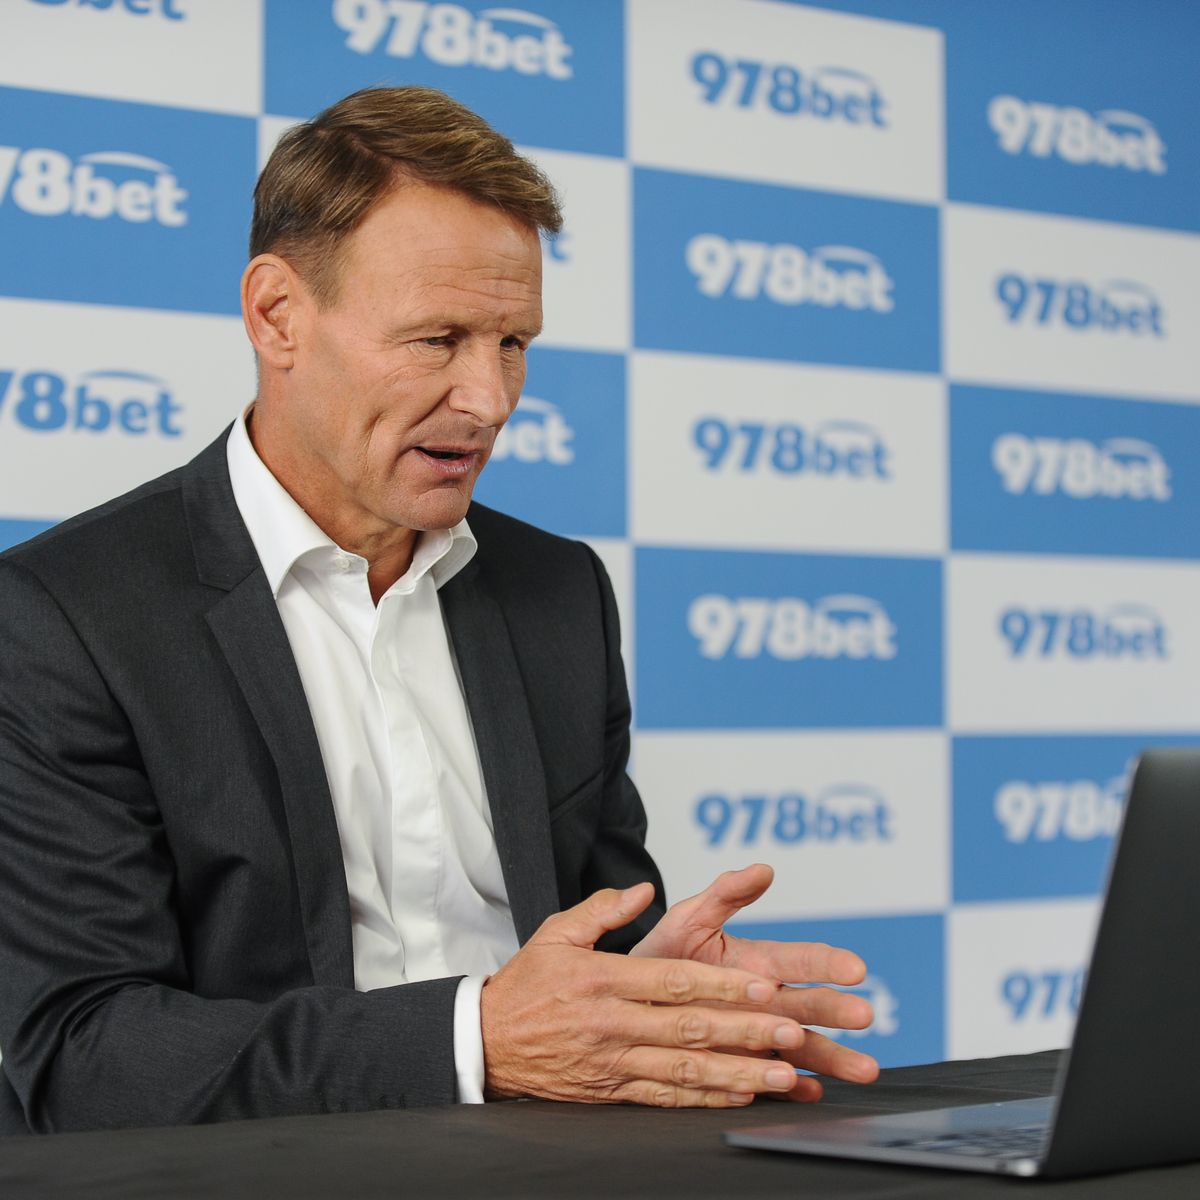 EPL: Teddy Sheringham predicts drubbing for Man United against City